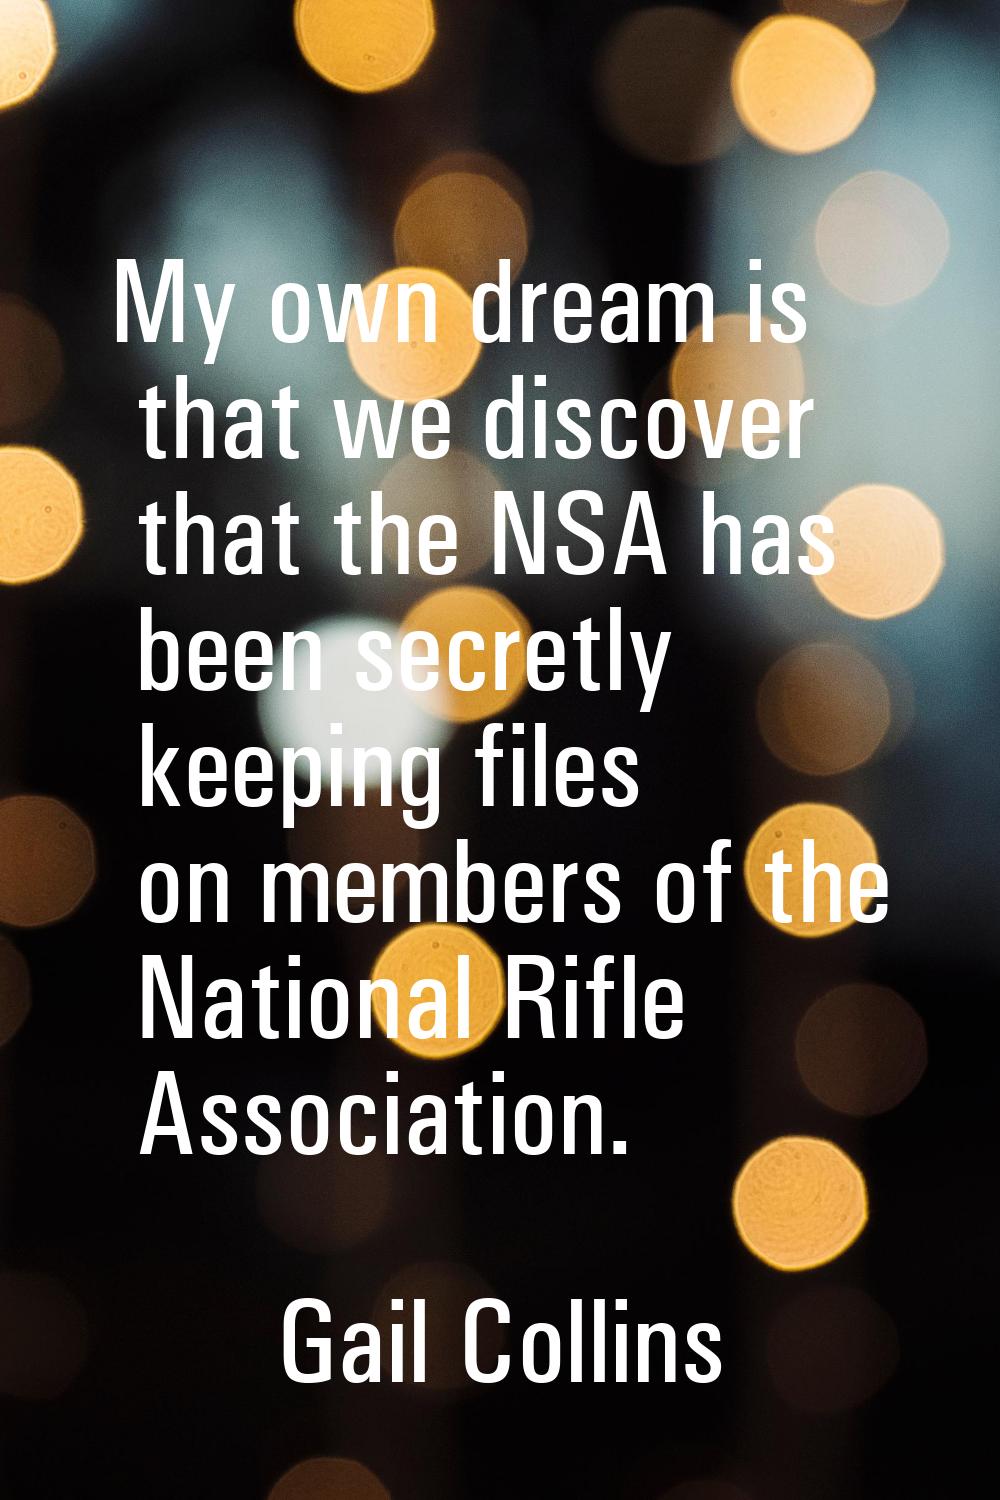 My own dream is that we discover that the NSA has been secretly keeping files on members of the Nat